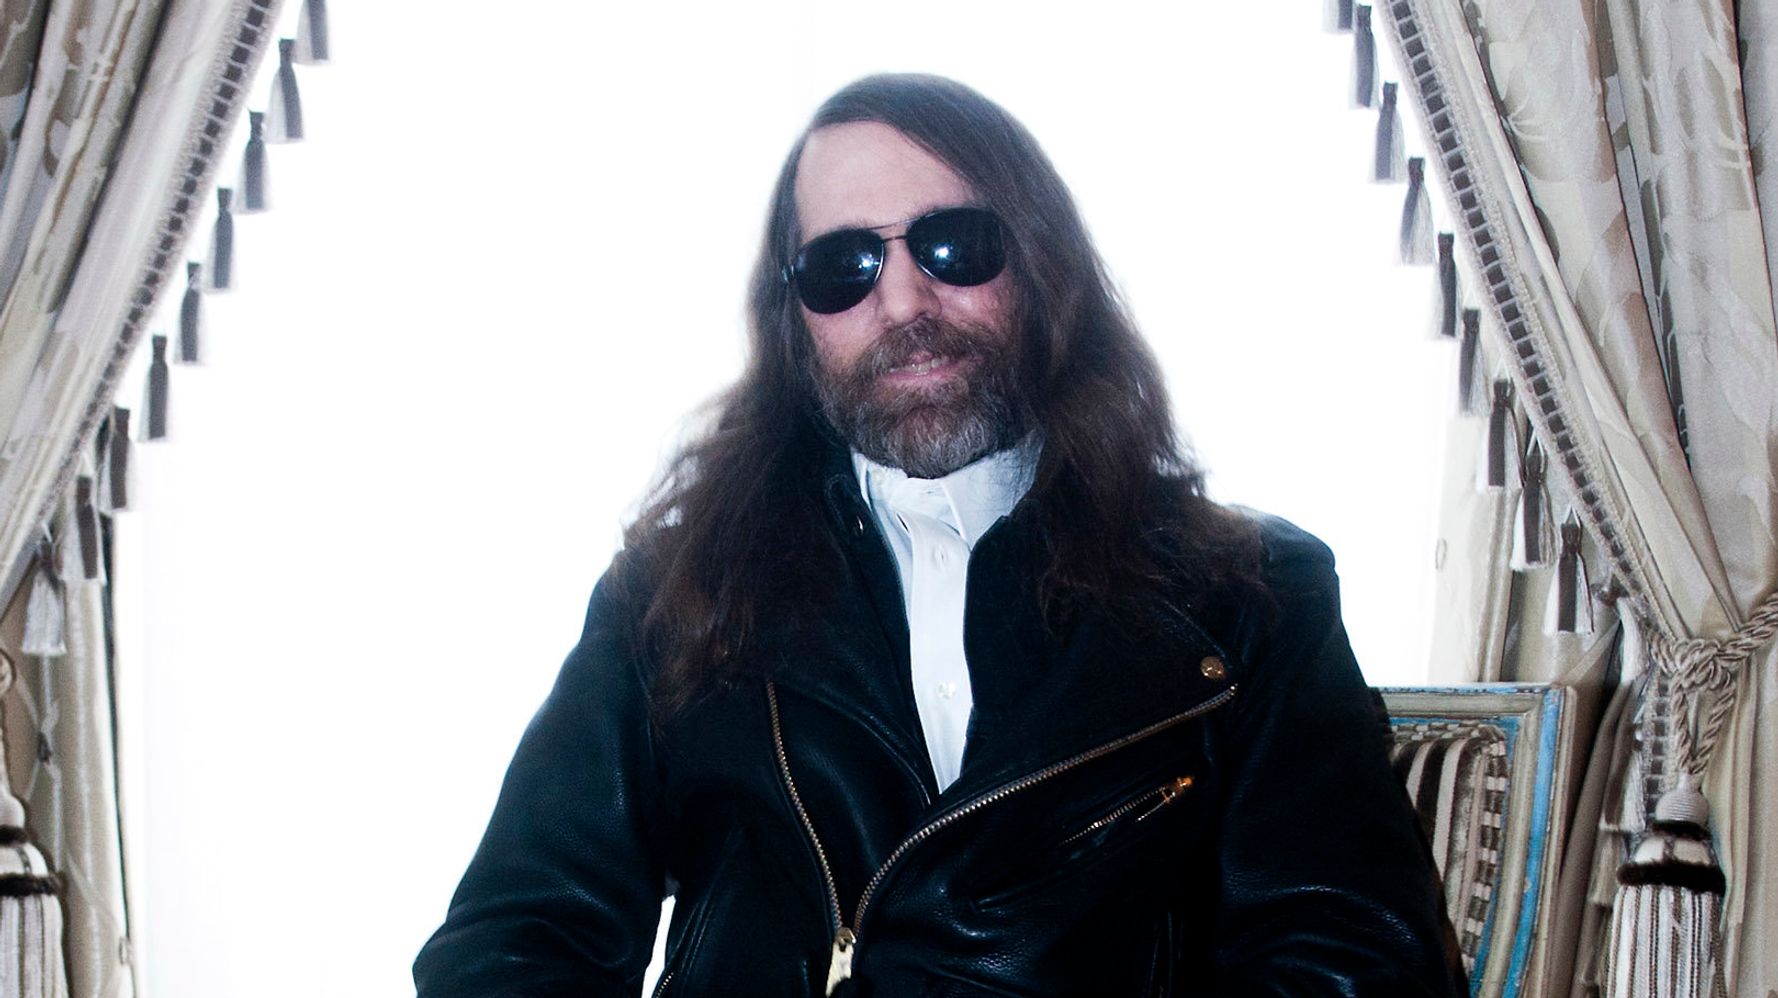 Paul O'Neill, Trans-Siberian Orchestra Founder, Dies at 61